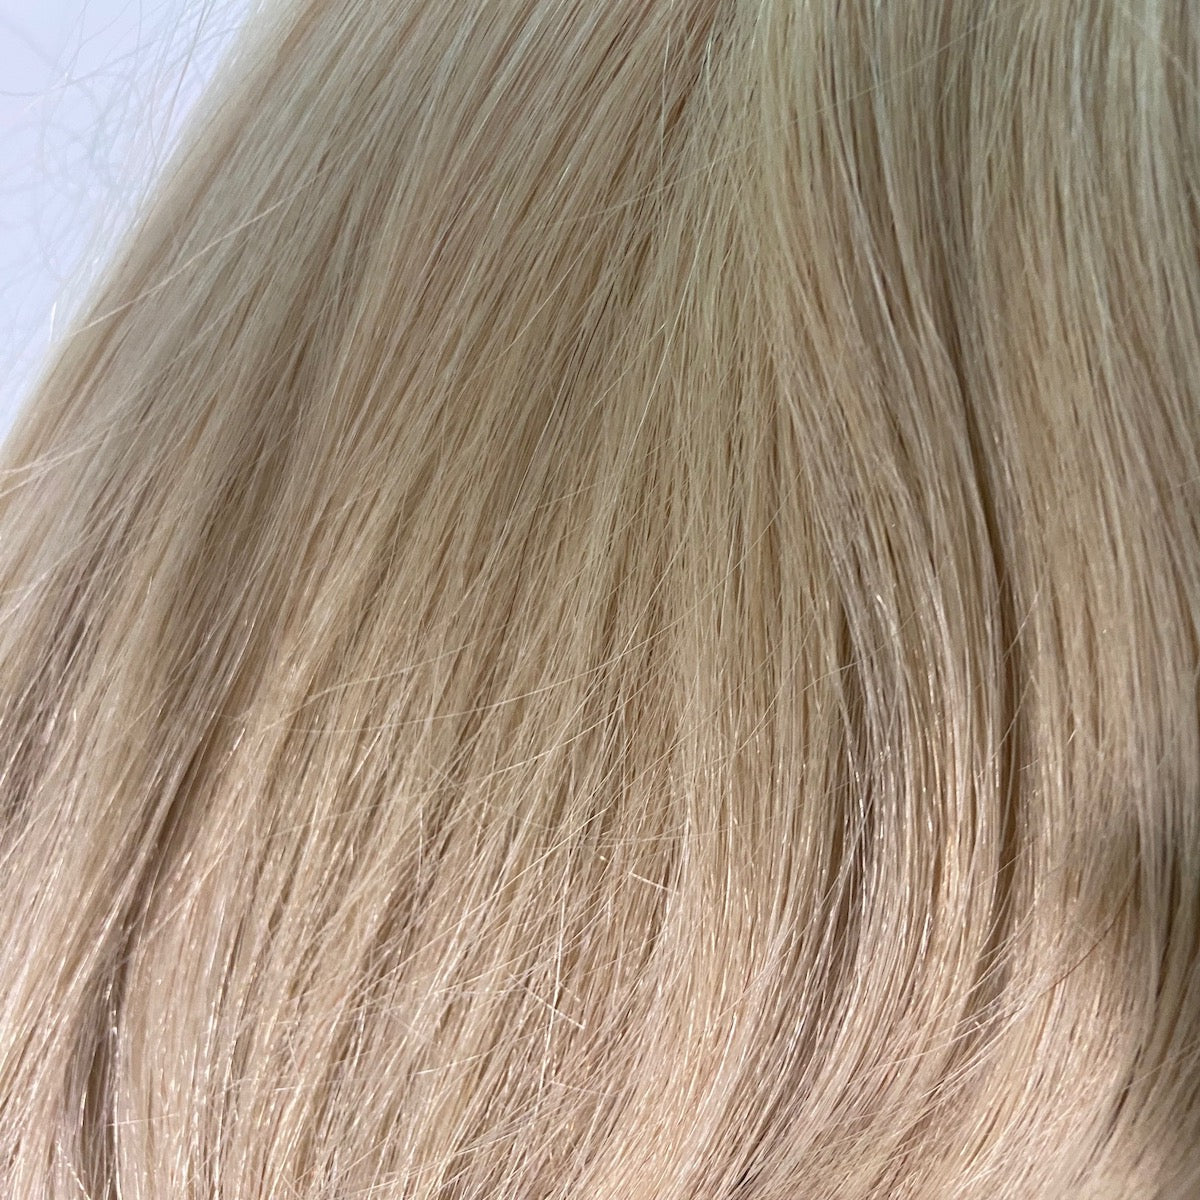 Tape-In 24" 55g Professional Hair Extensions - #16 Vanilla Blonde